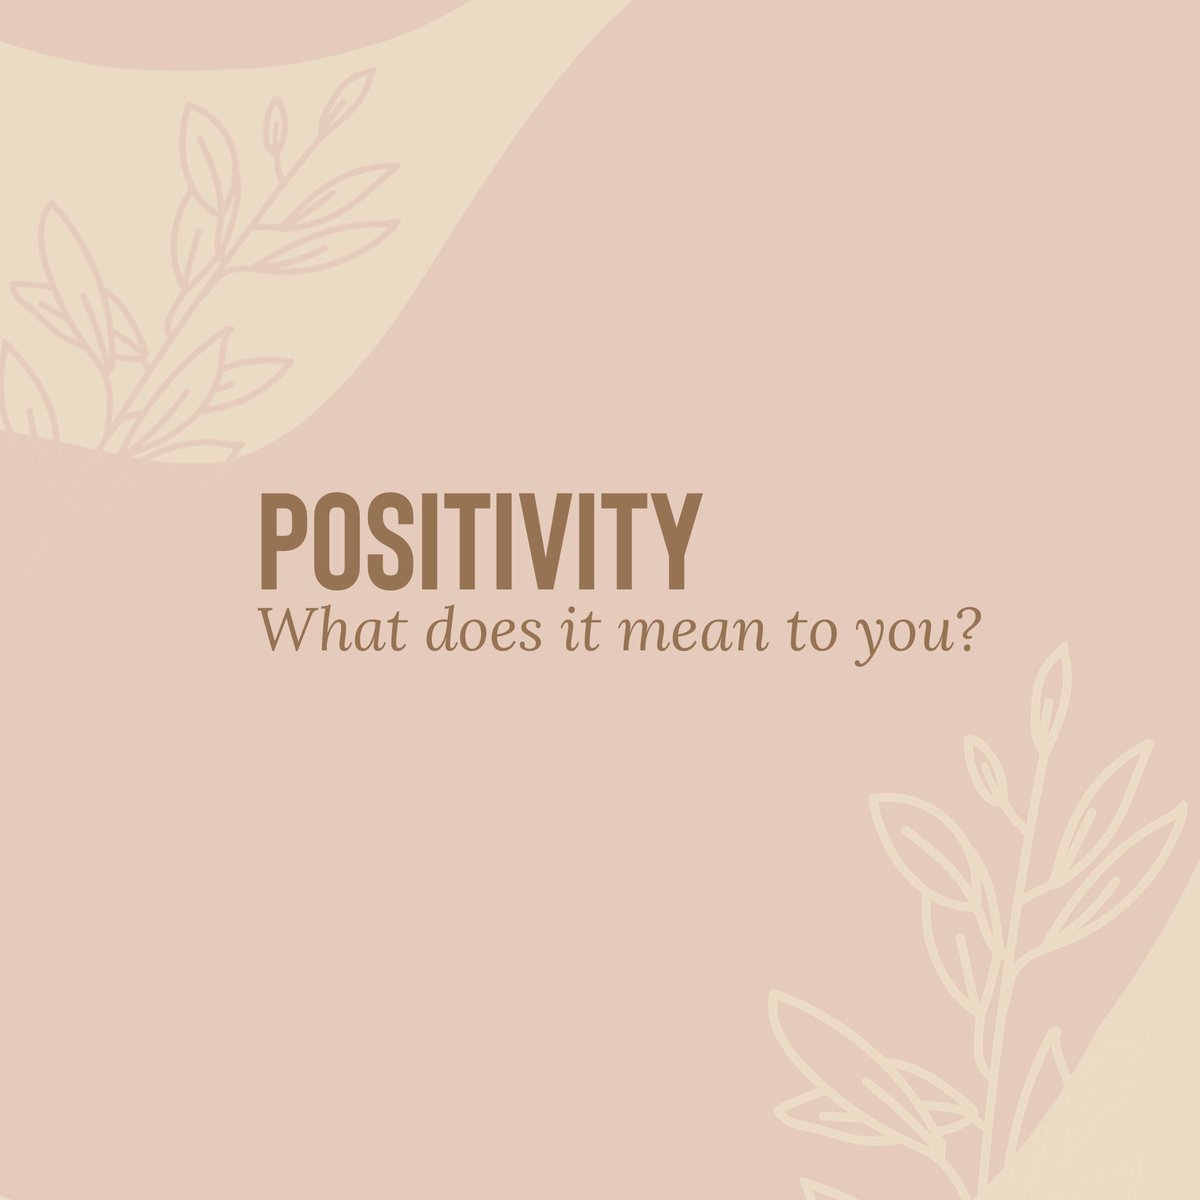 Today, we would like to hear from you! 💭
What does POSITIVITY or being POSITIVE mean to you or your loved one? ☀️

Post your answer in the comment section below; 

#positivity #positive #positivethinking #care #caring #domcare